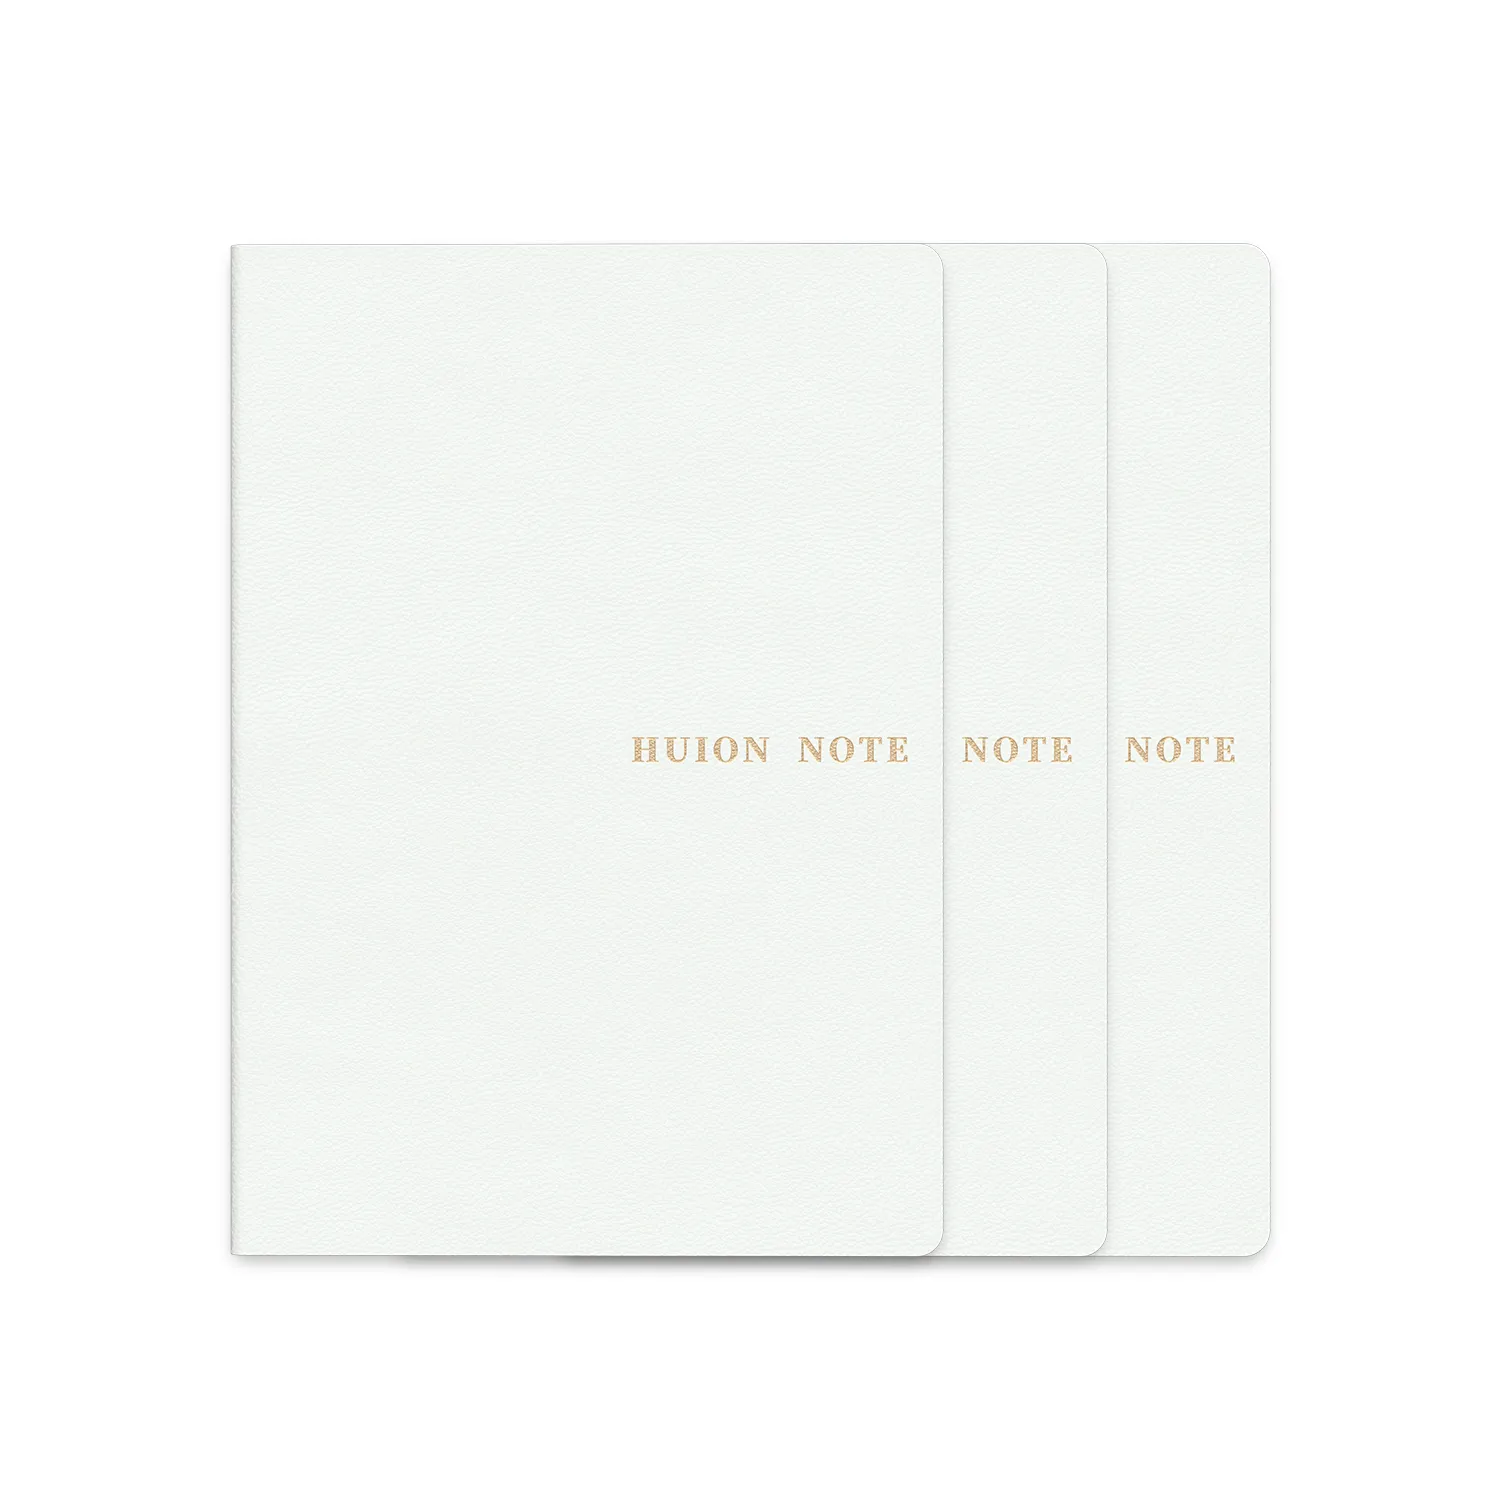 Replacement Notepads for Huion Note